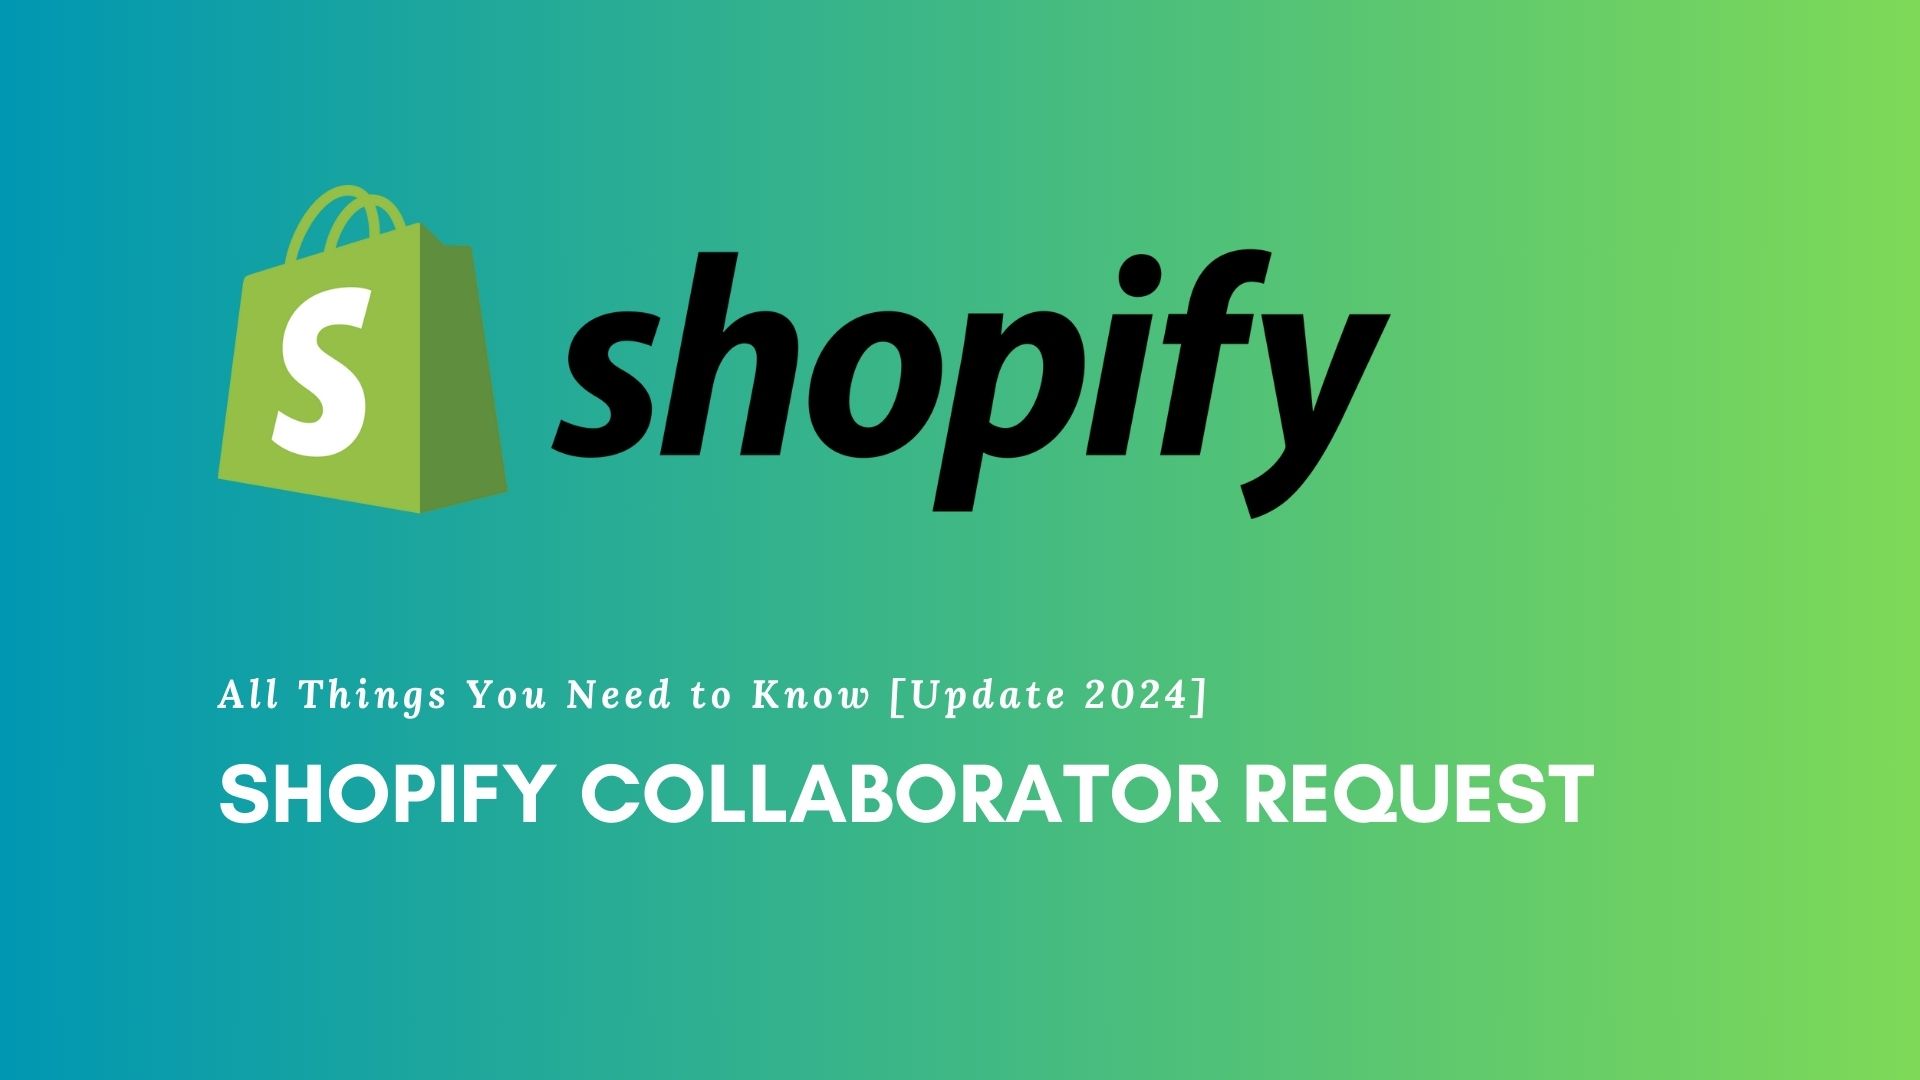 Shopify Collaborator Request: All Things You Need to Know [Update 2024]